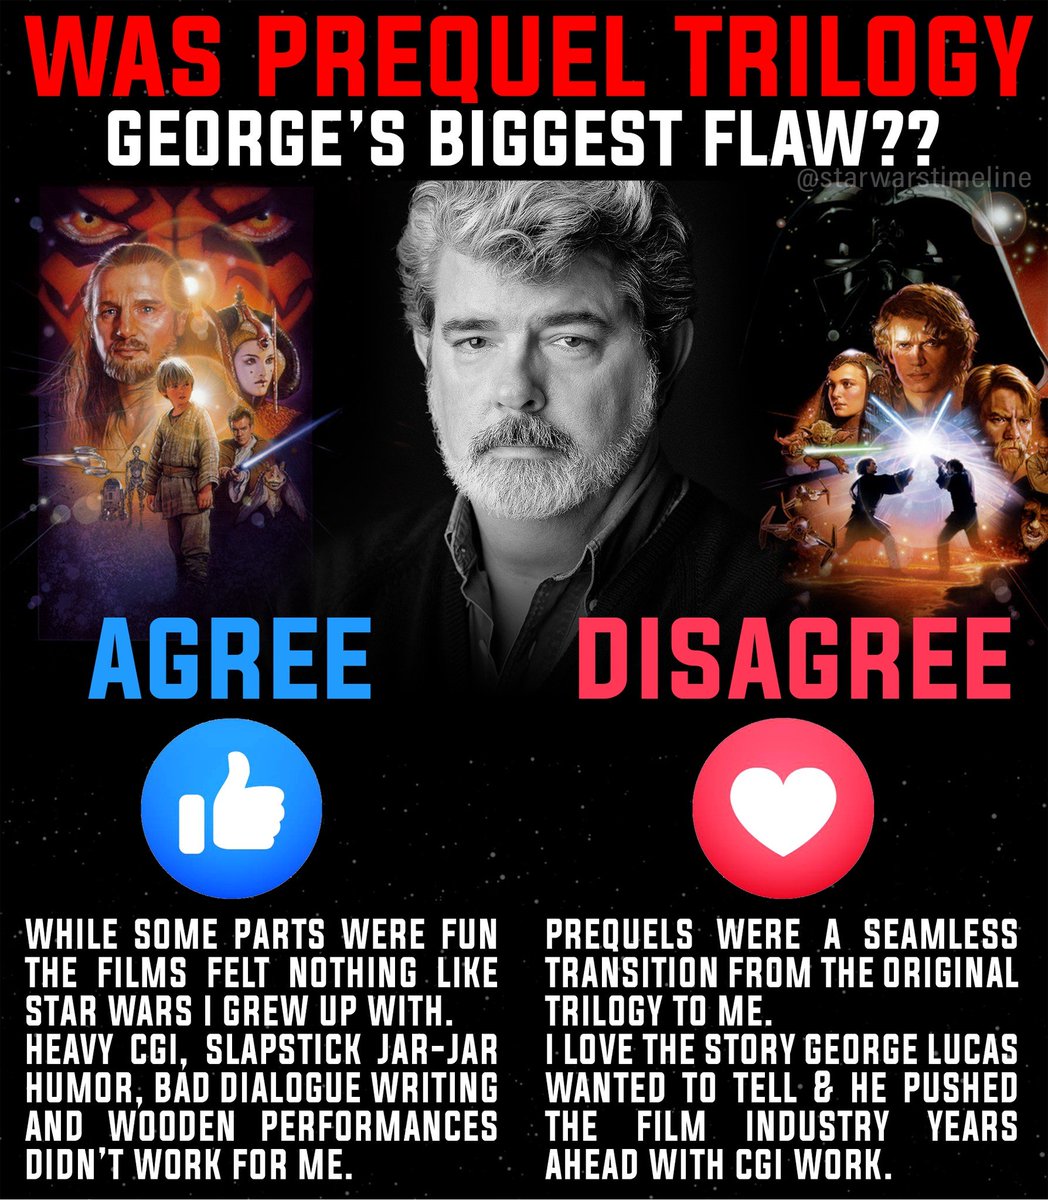 Let's hear it #StarWars fans. If you're OG fan or grew up with PT, I'd like all opinions.
@GenuineChitChat @StarWarsonHigh @PartyboatDave @Andy_Review  @RVN1207 @ExploredWars @SW_HighRepublic 
#PrequelTrilogy #GeorgeLucas #PhantomMenace #AttackoftheClones #RevengeoftheSith